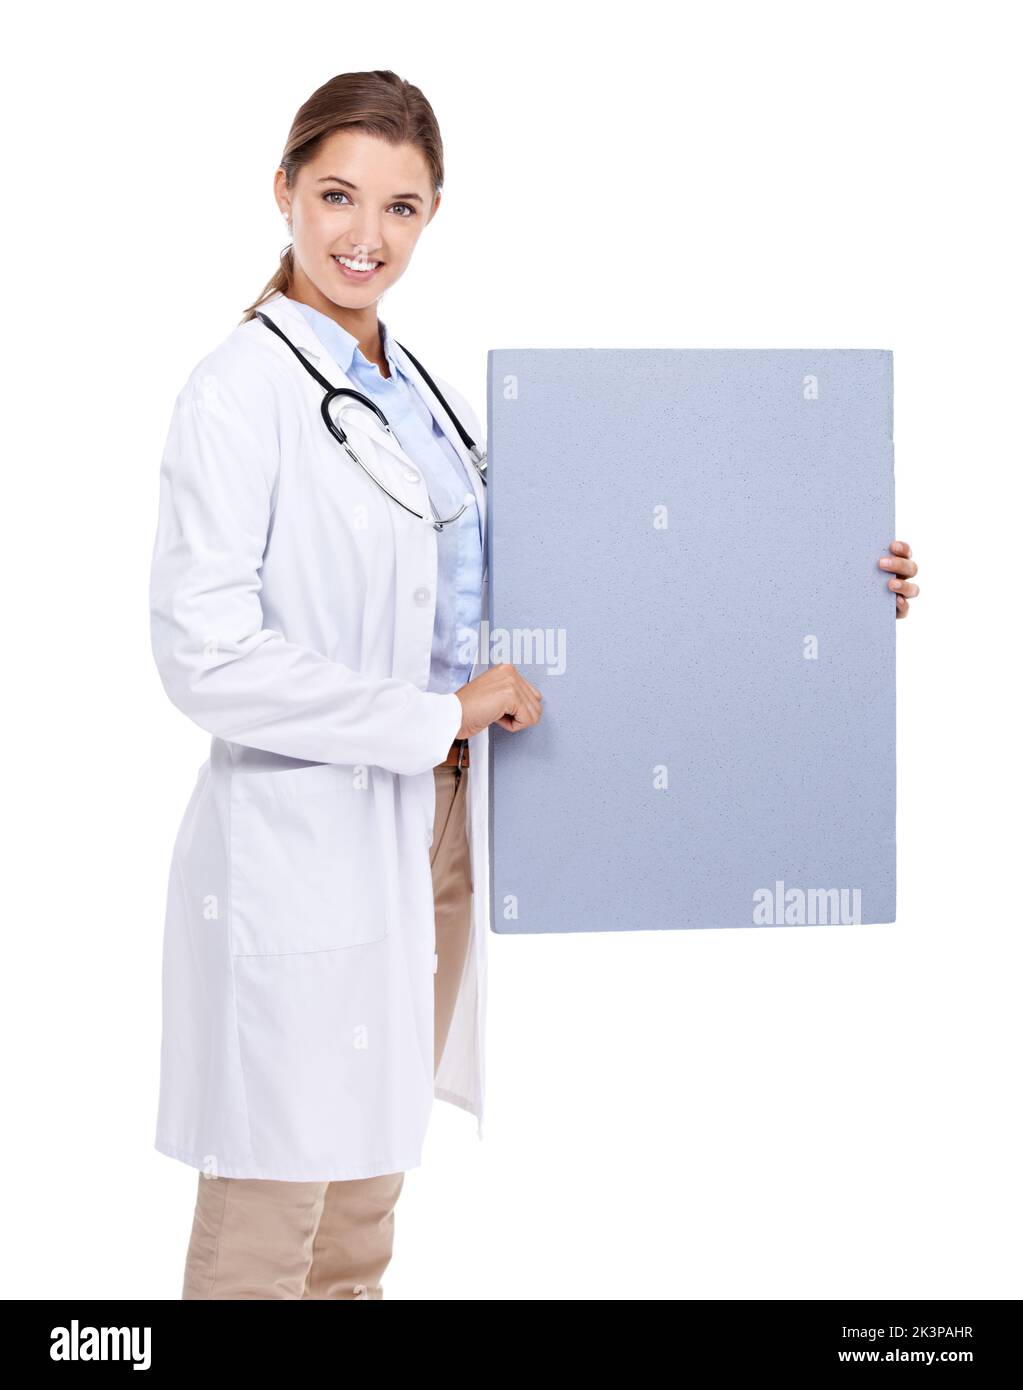 Introducing the new healthcare plan. Portrait of an attractive young woman holding copyspace. Stock Photo